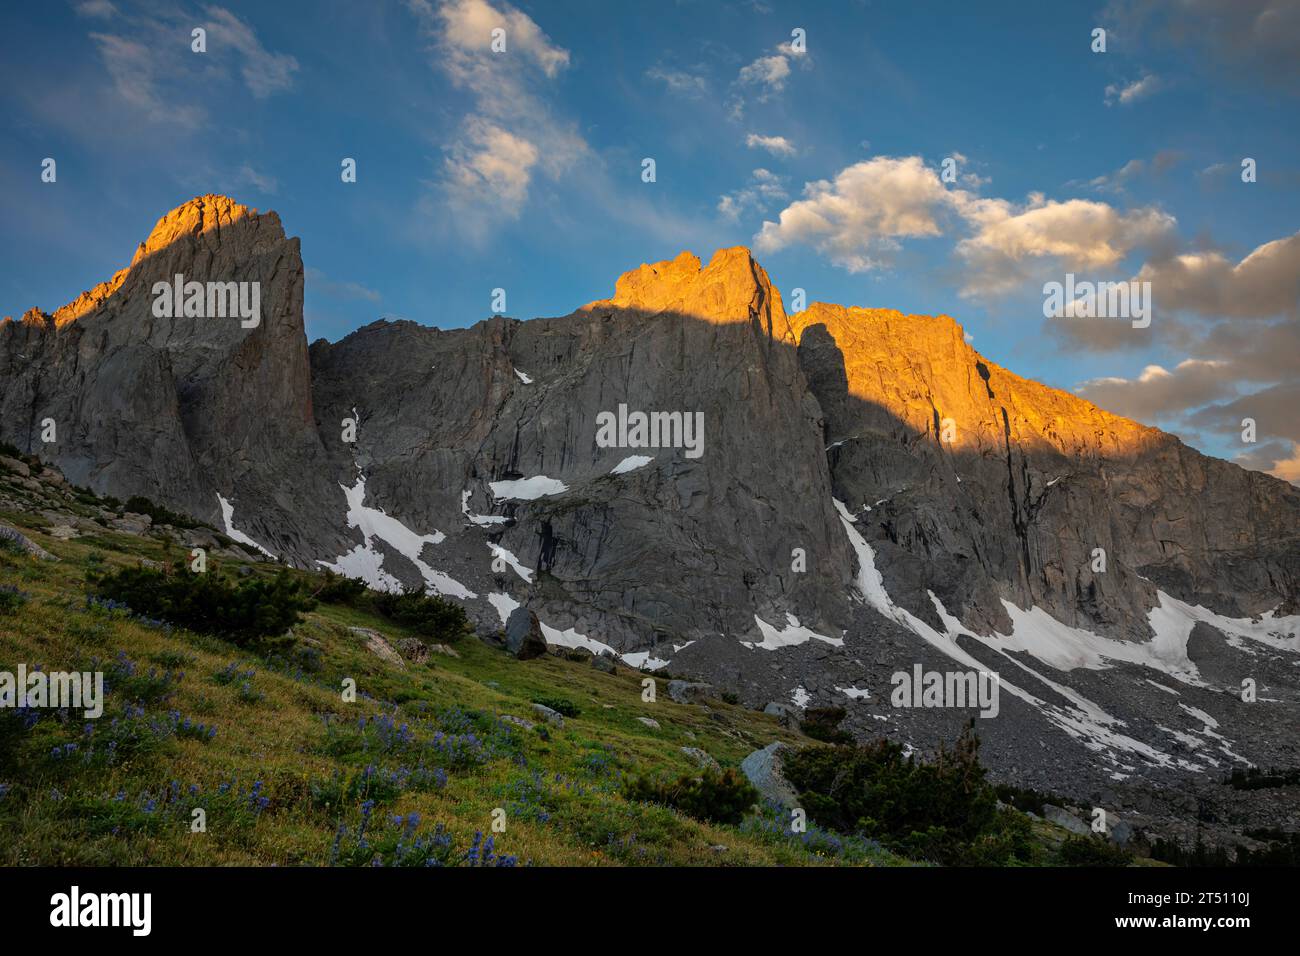 WY05587-00...WYOMING - Sunrise on the Warbonnet, Warrior and Warrior 2 Peaks, part of the Cirque of the Towers, Popo Agie Wilderness. Stock Photo